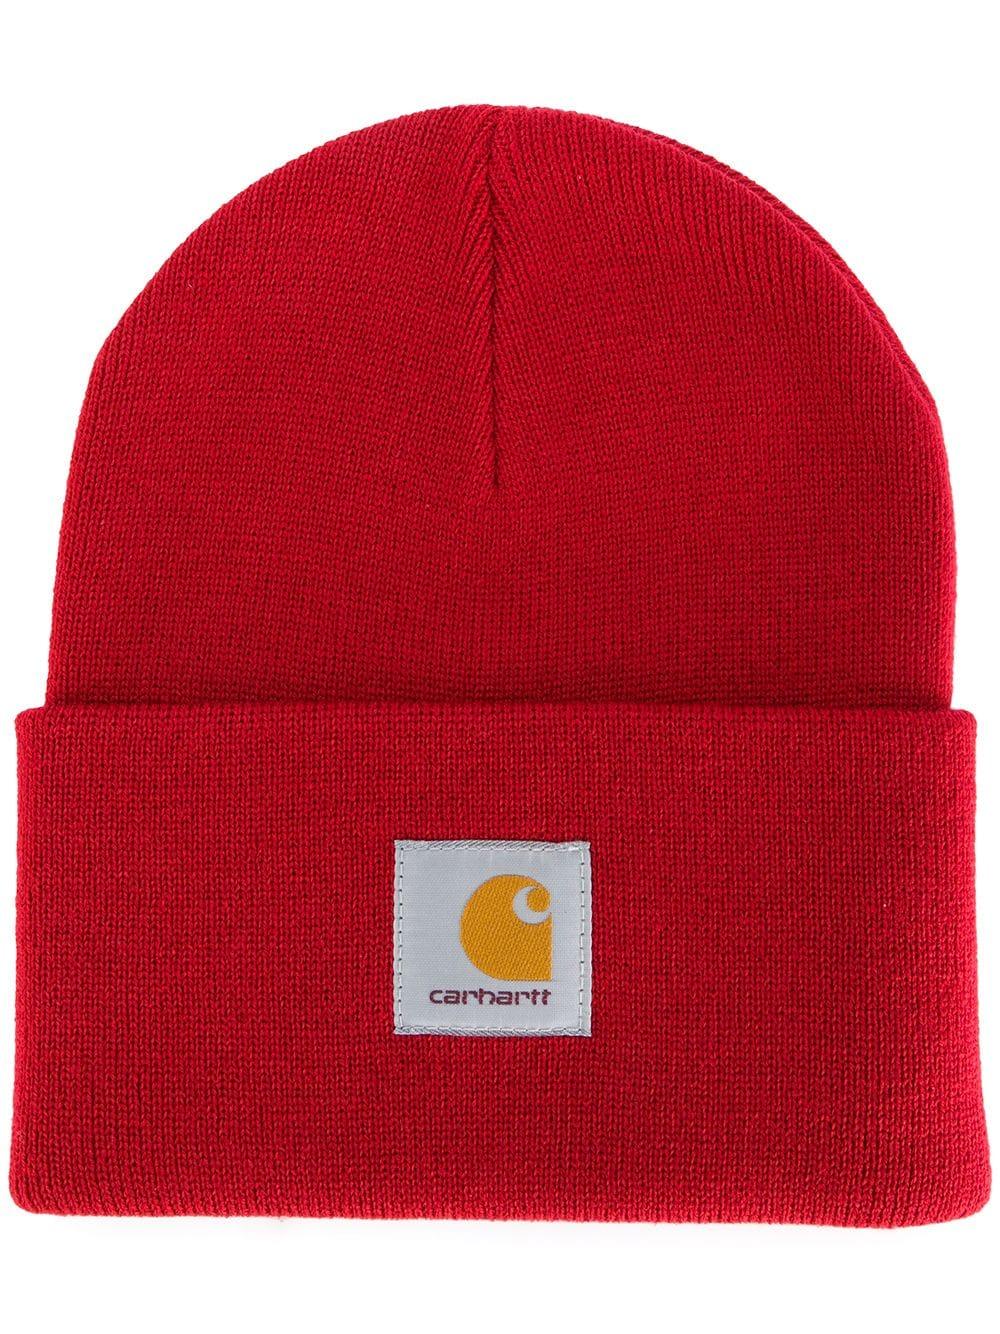 Carhartt Synthetic Logo Patch Beanie in Red for Men - Lyst